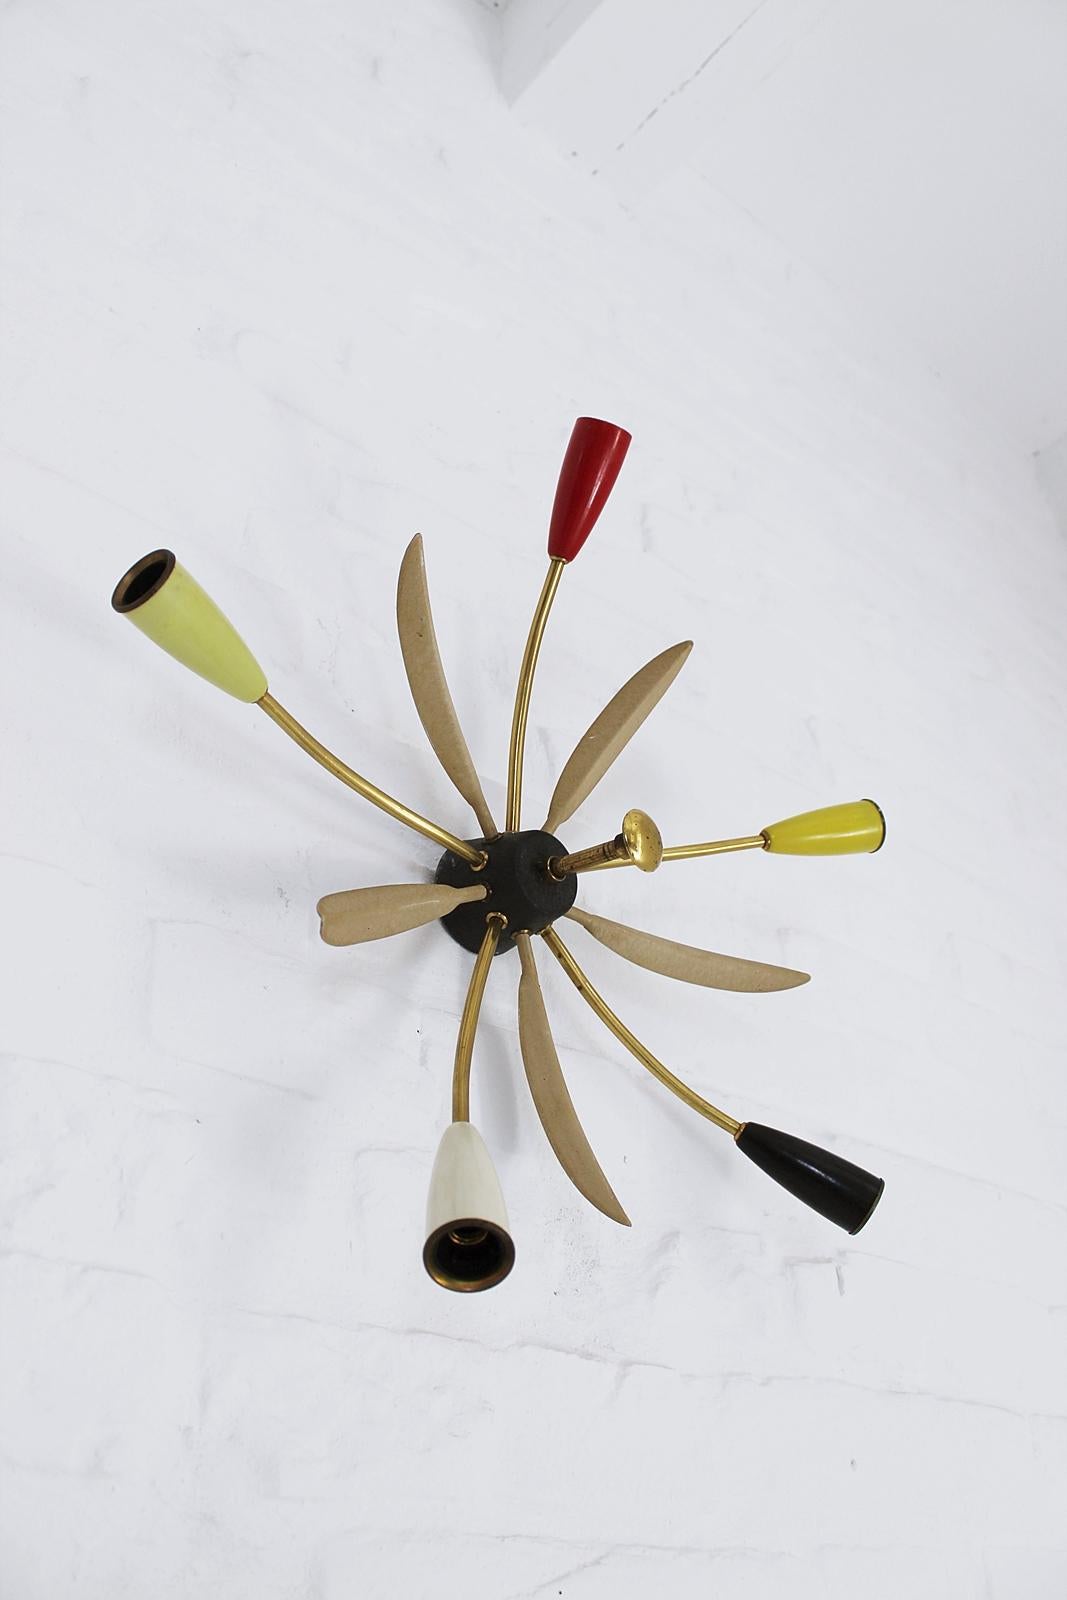 Vintage Mid-Century Modern Sputnik flush mount ceiling lamp from 1950s in Stilnovo style. Each of the five arms has one original E14 socket which is covered by colorful cup. In good condition with a light patina on the brass.